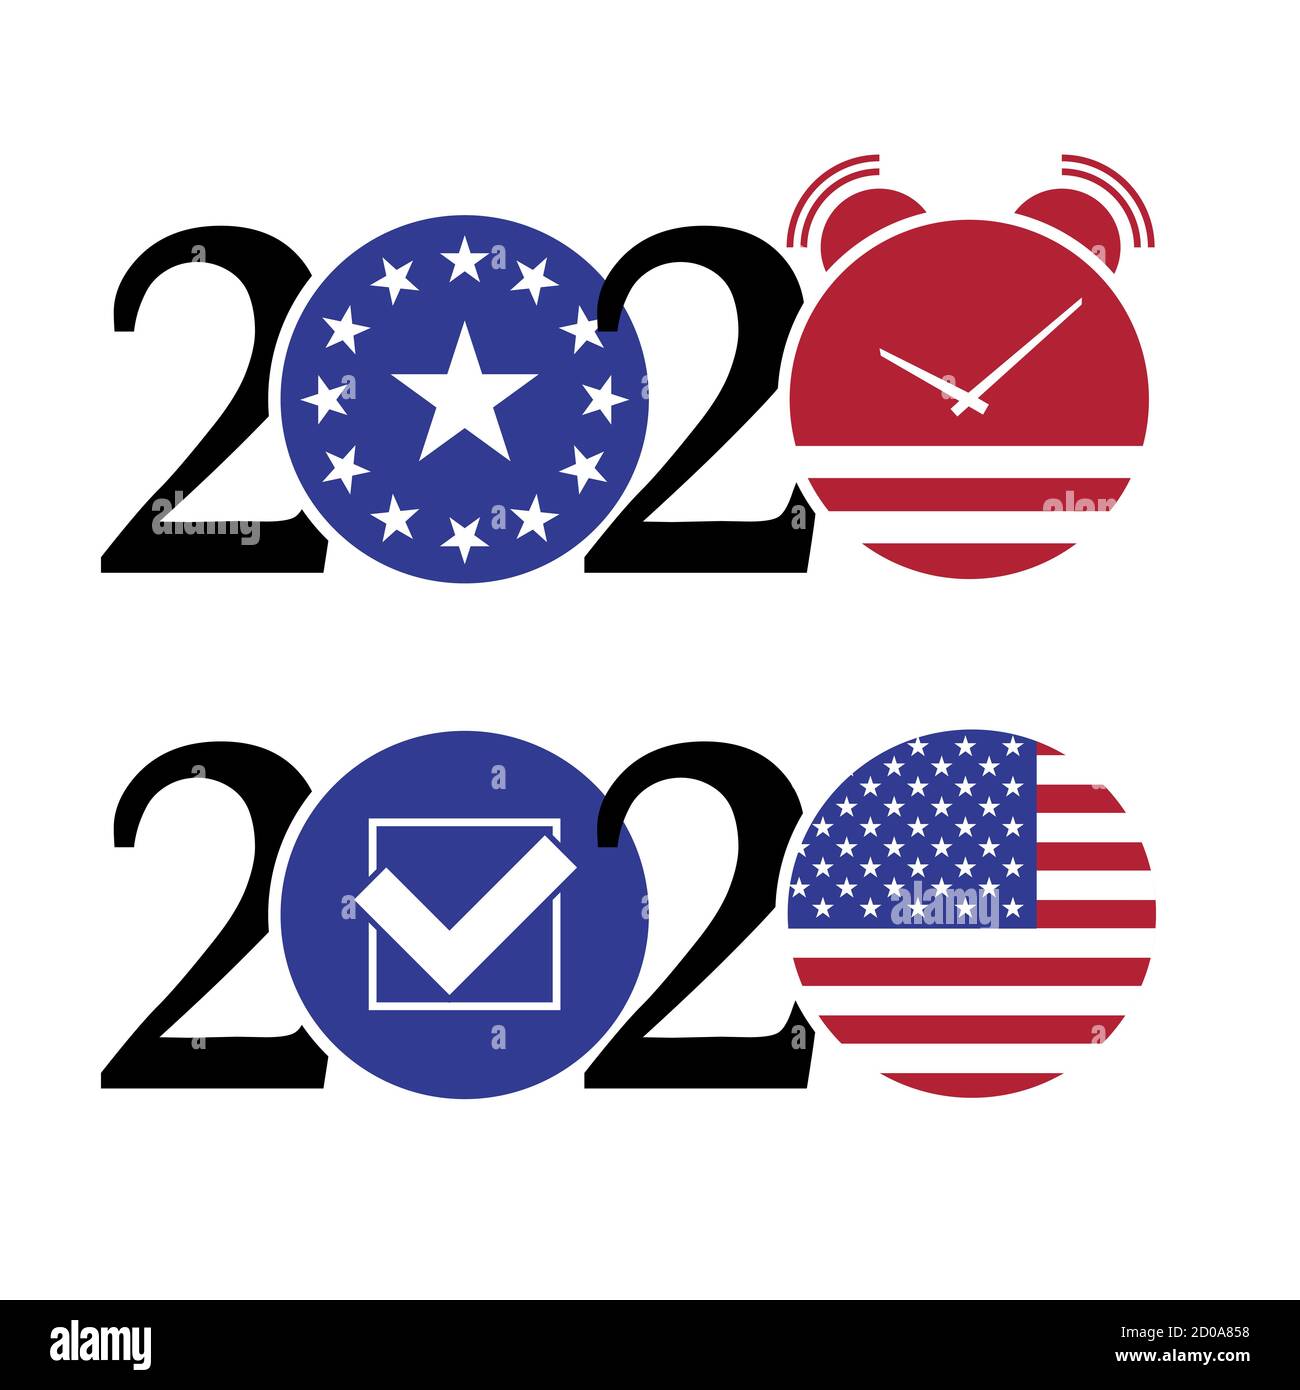 2020 United States presidential election concept. illustration. Stock Photo